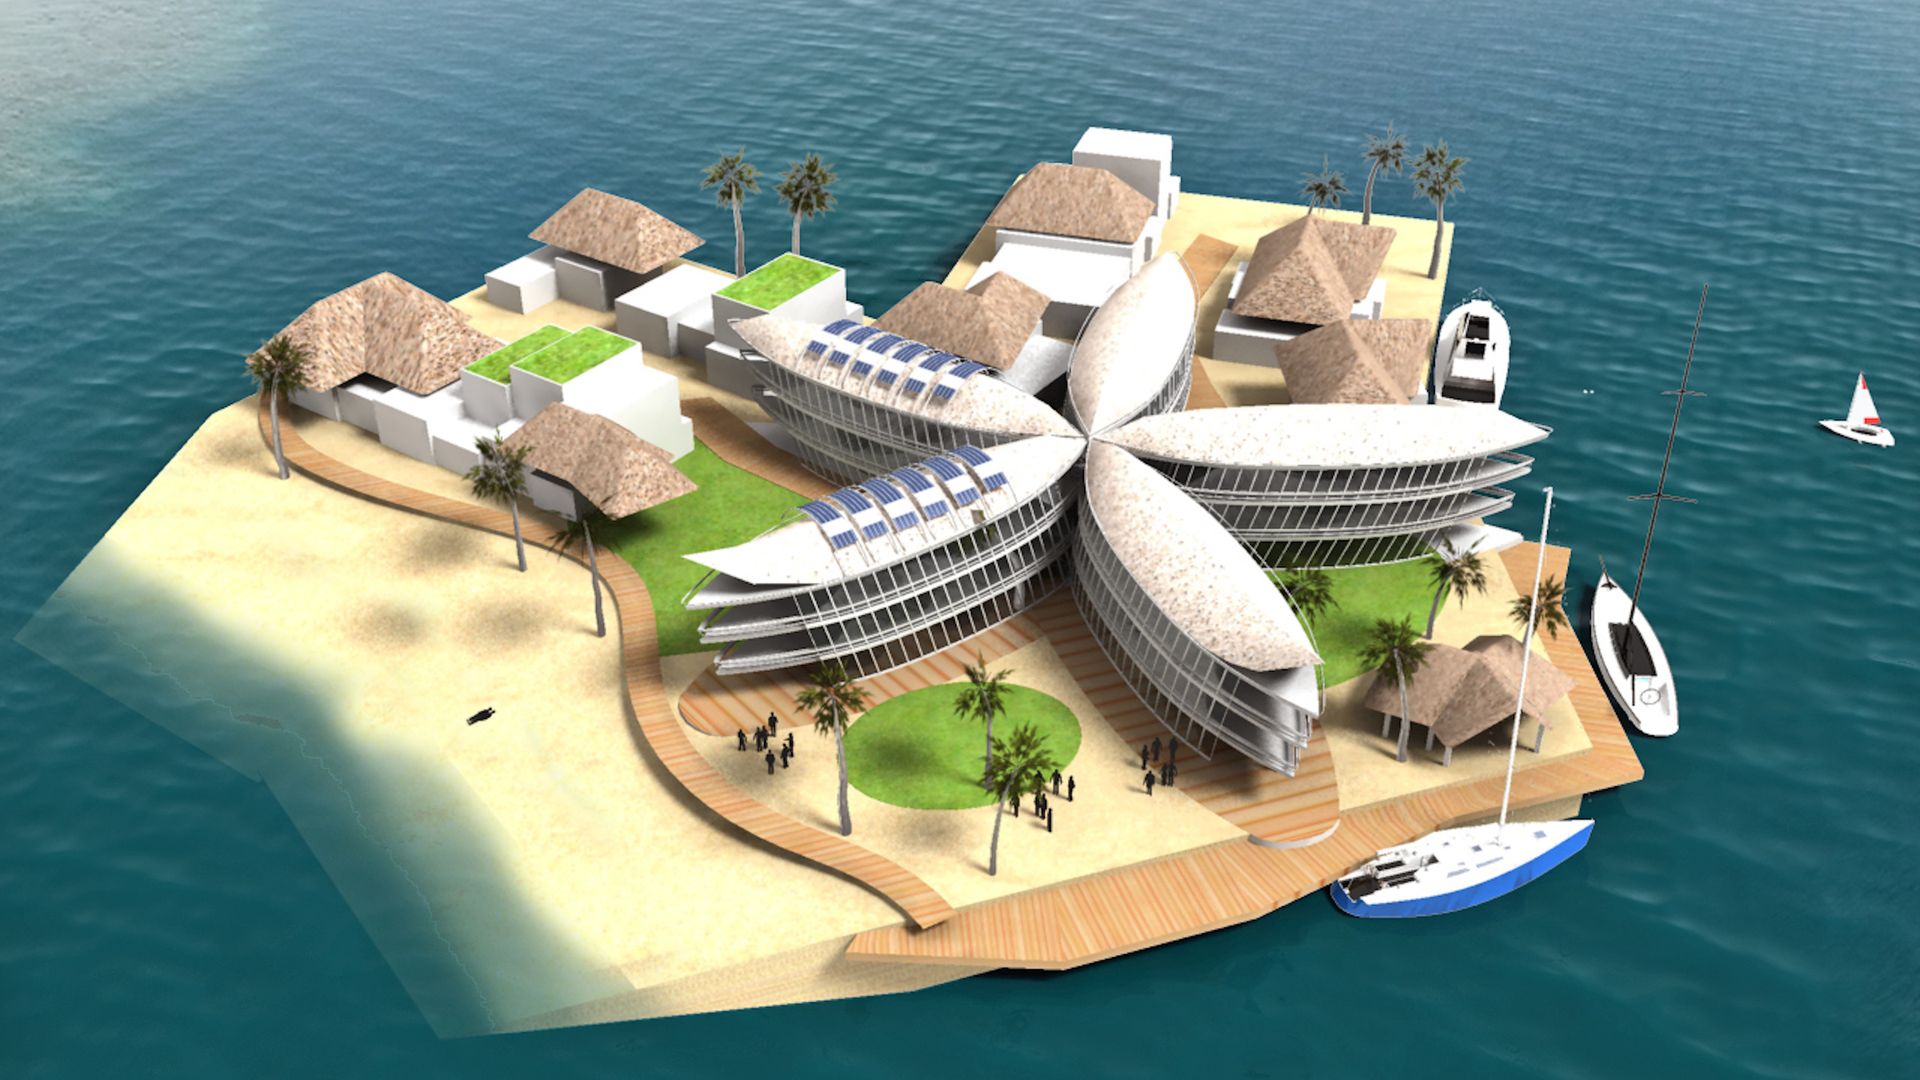 Rendering of a floating island with buildings 